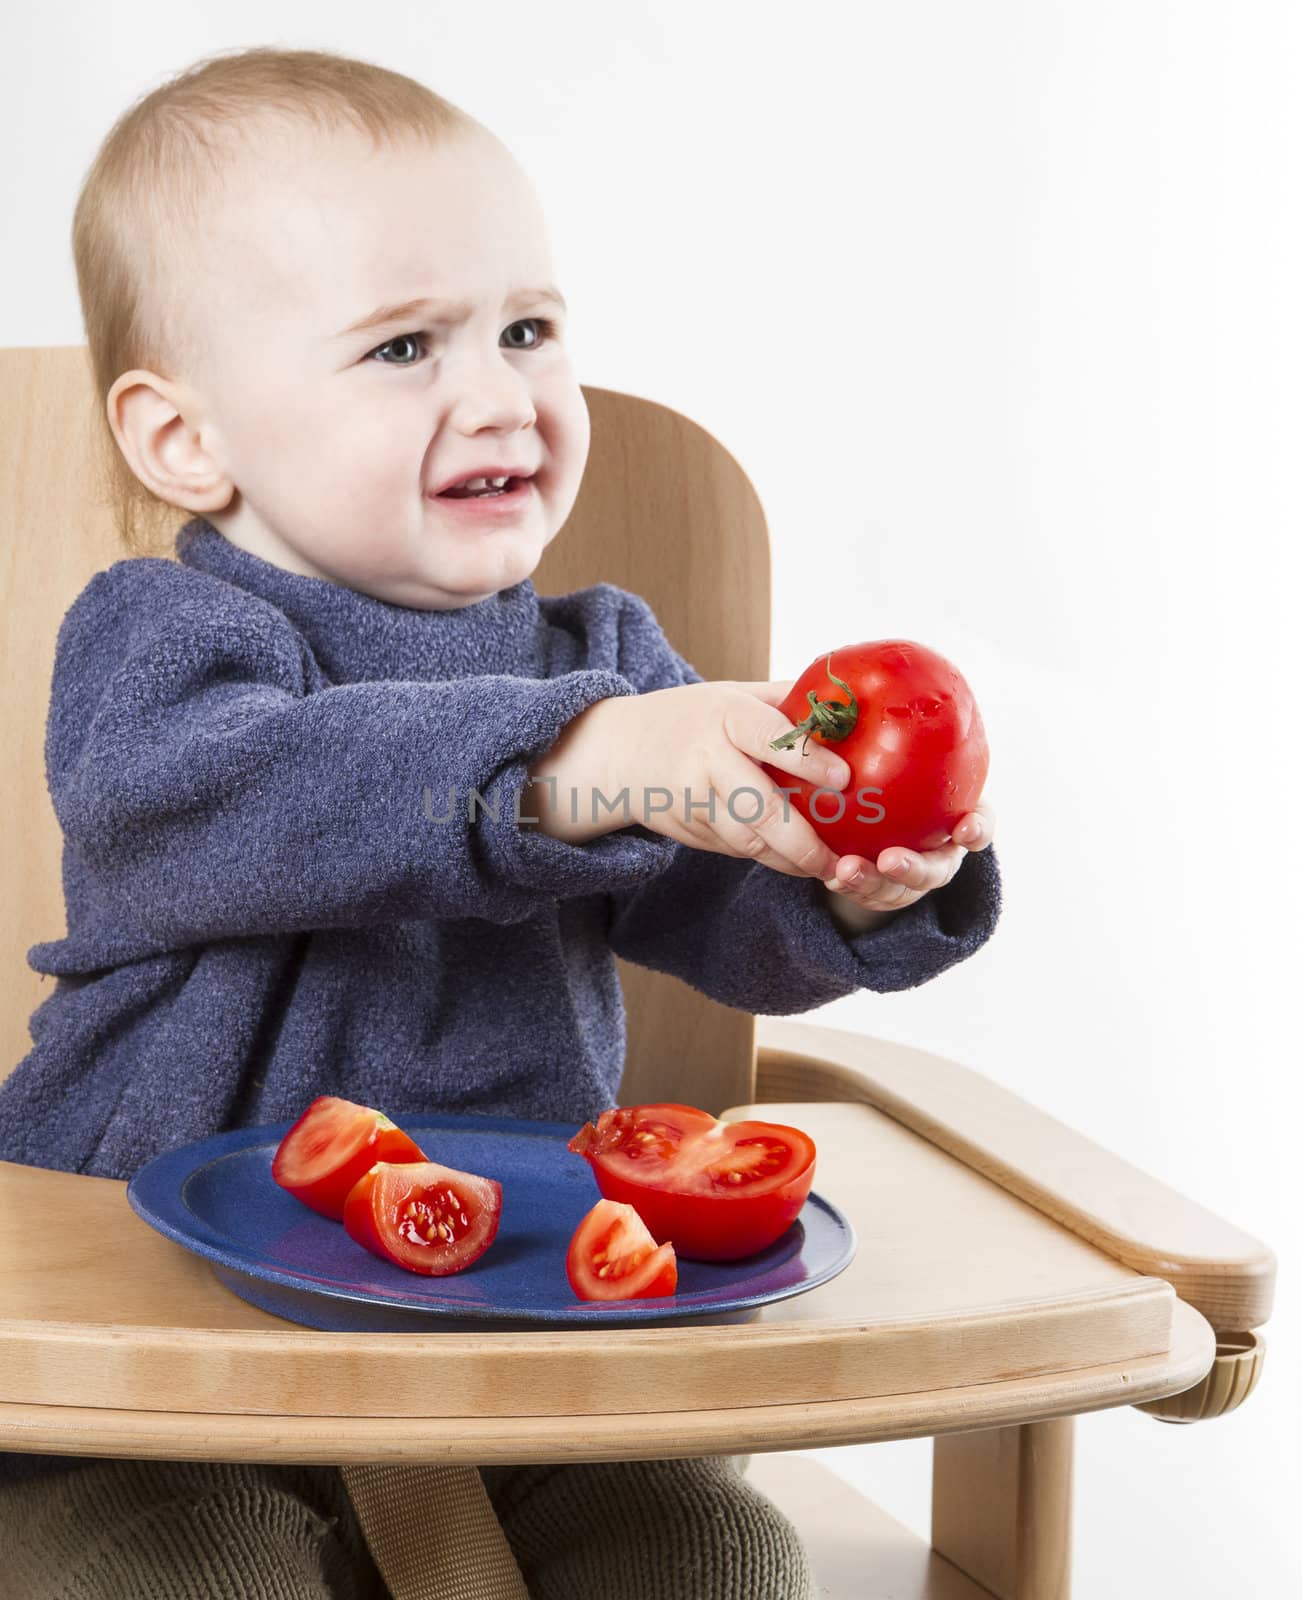 young child eating in high chair isolated in neutral background